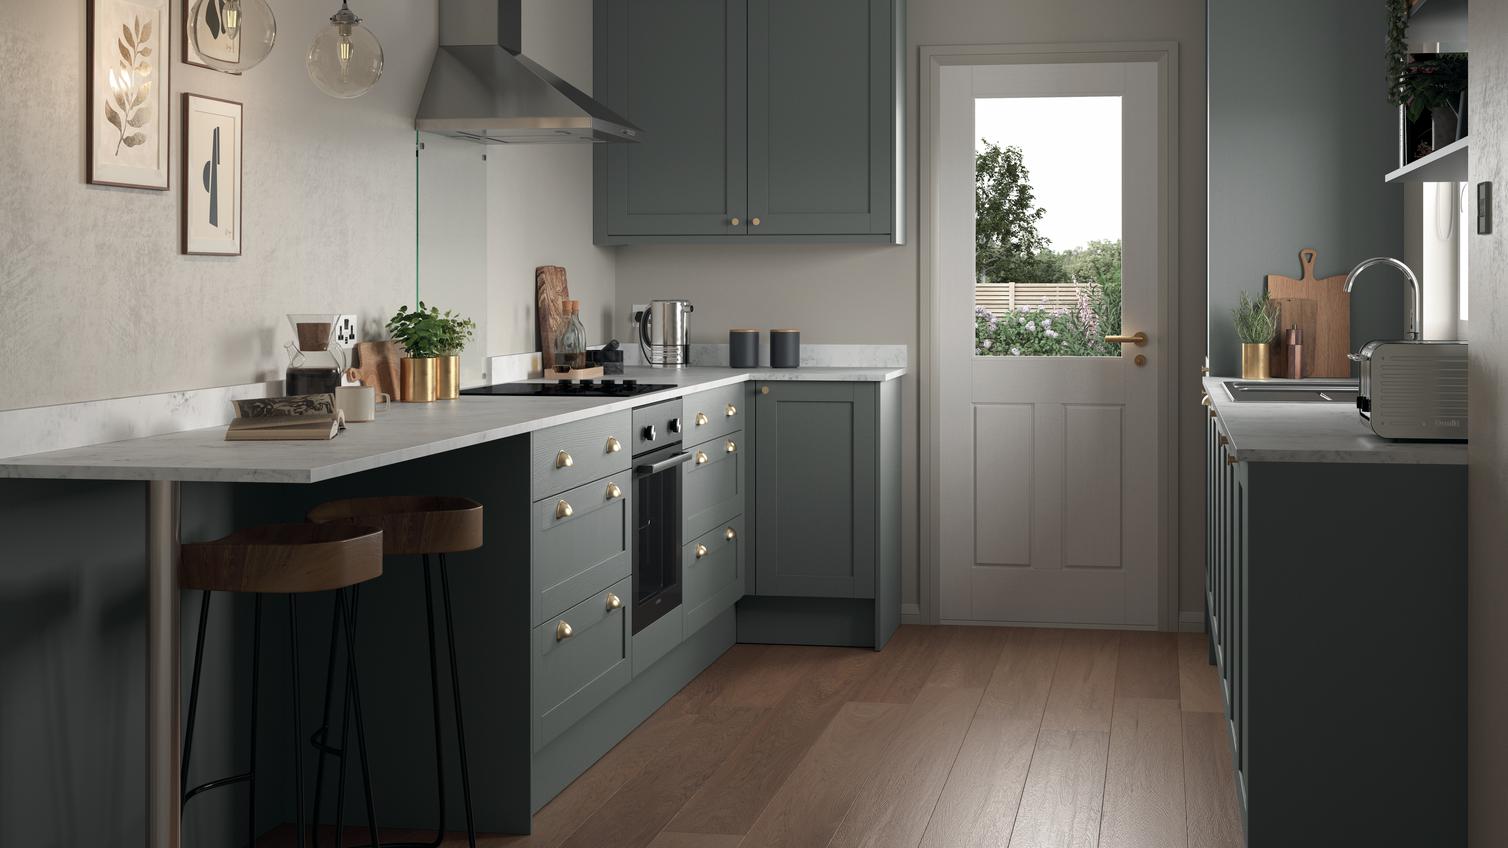 Compact grey kitchen in a galley layout. Features shaker doors, white worktops, and brass cup handles for a stately look